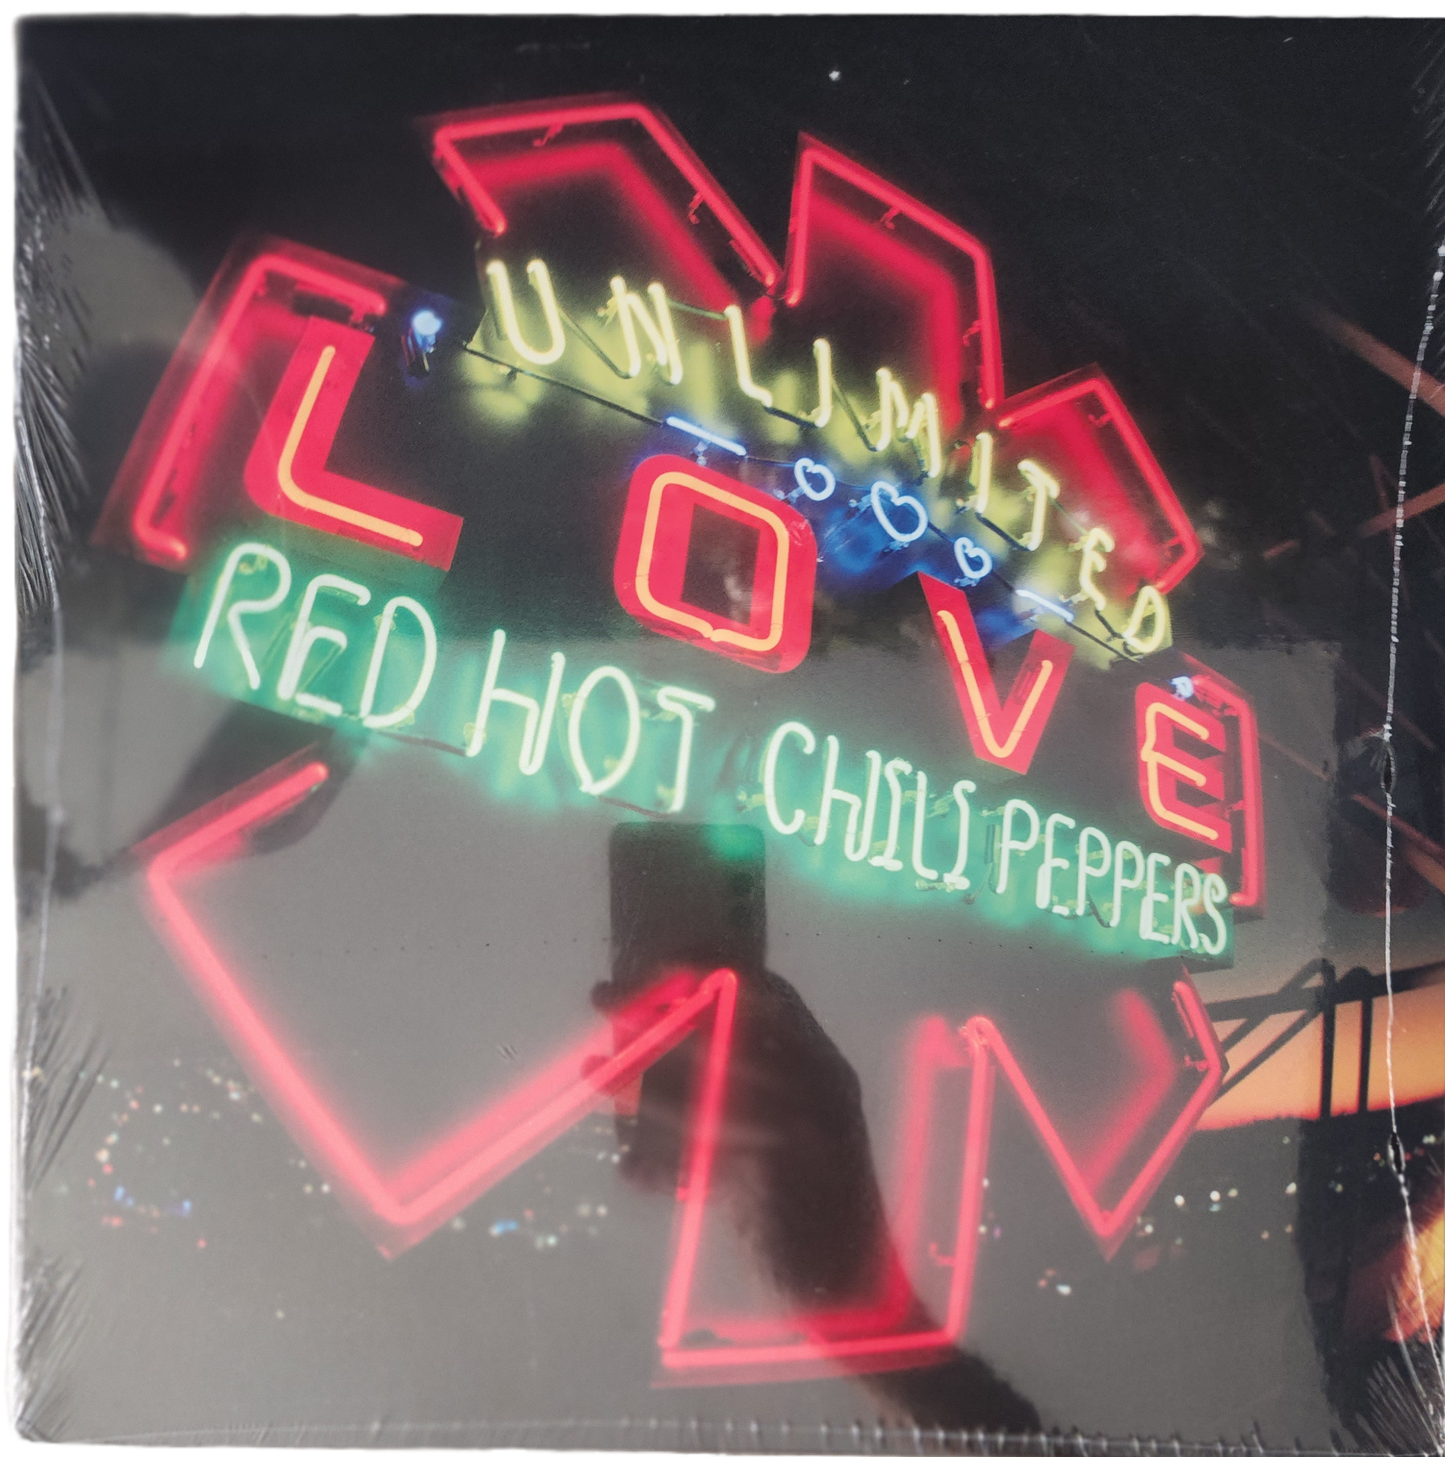 Red Hot Chili Peppers Vinyl Unlimited Love (Blue Vinyl)